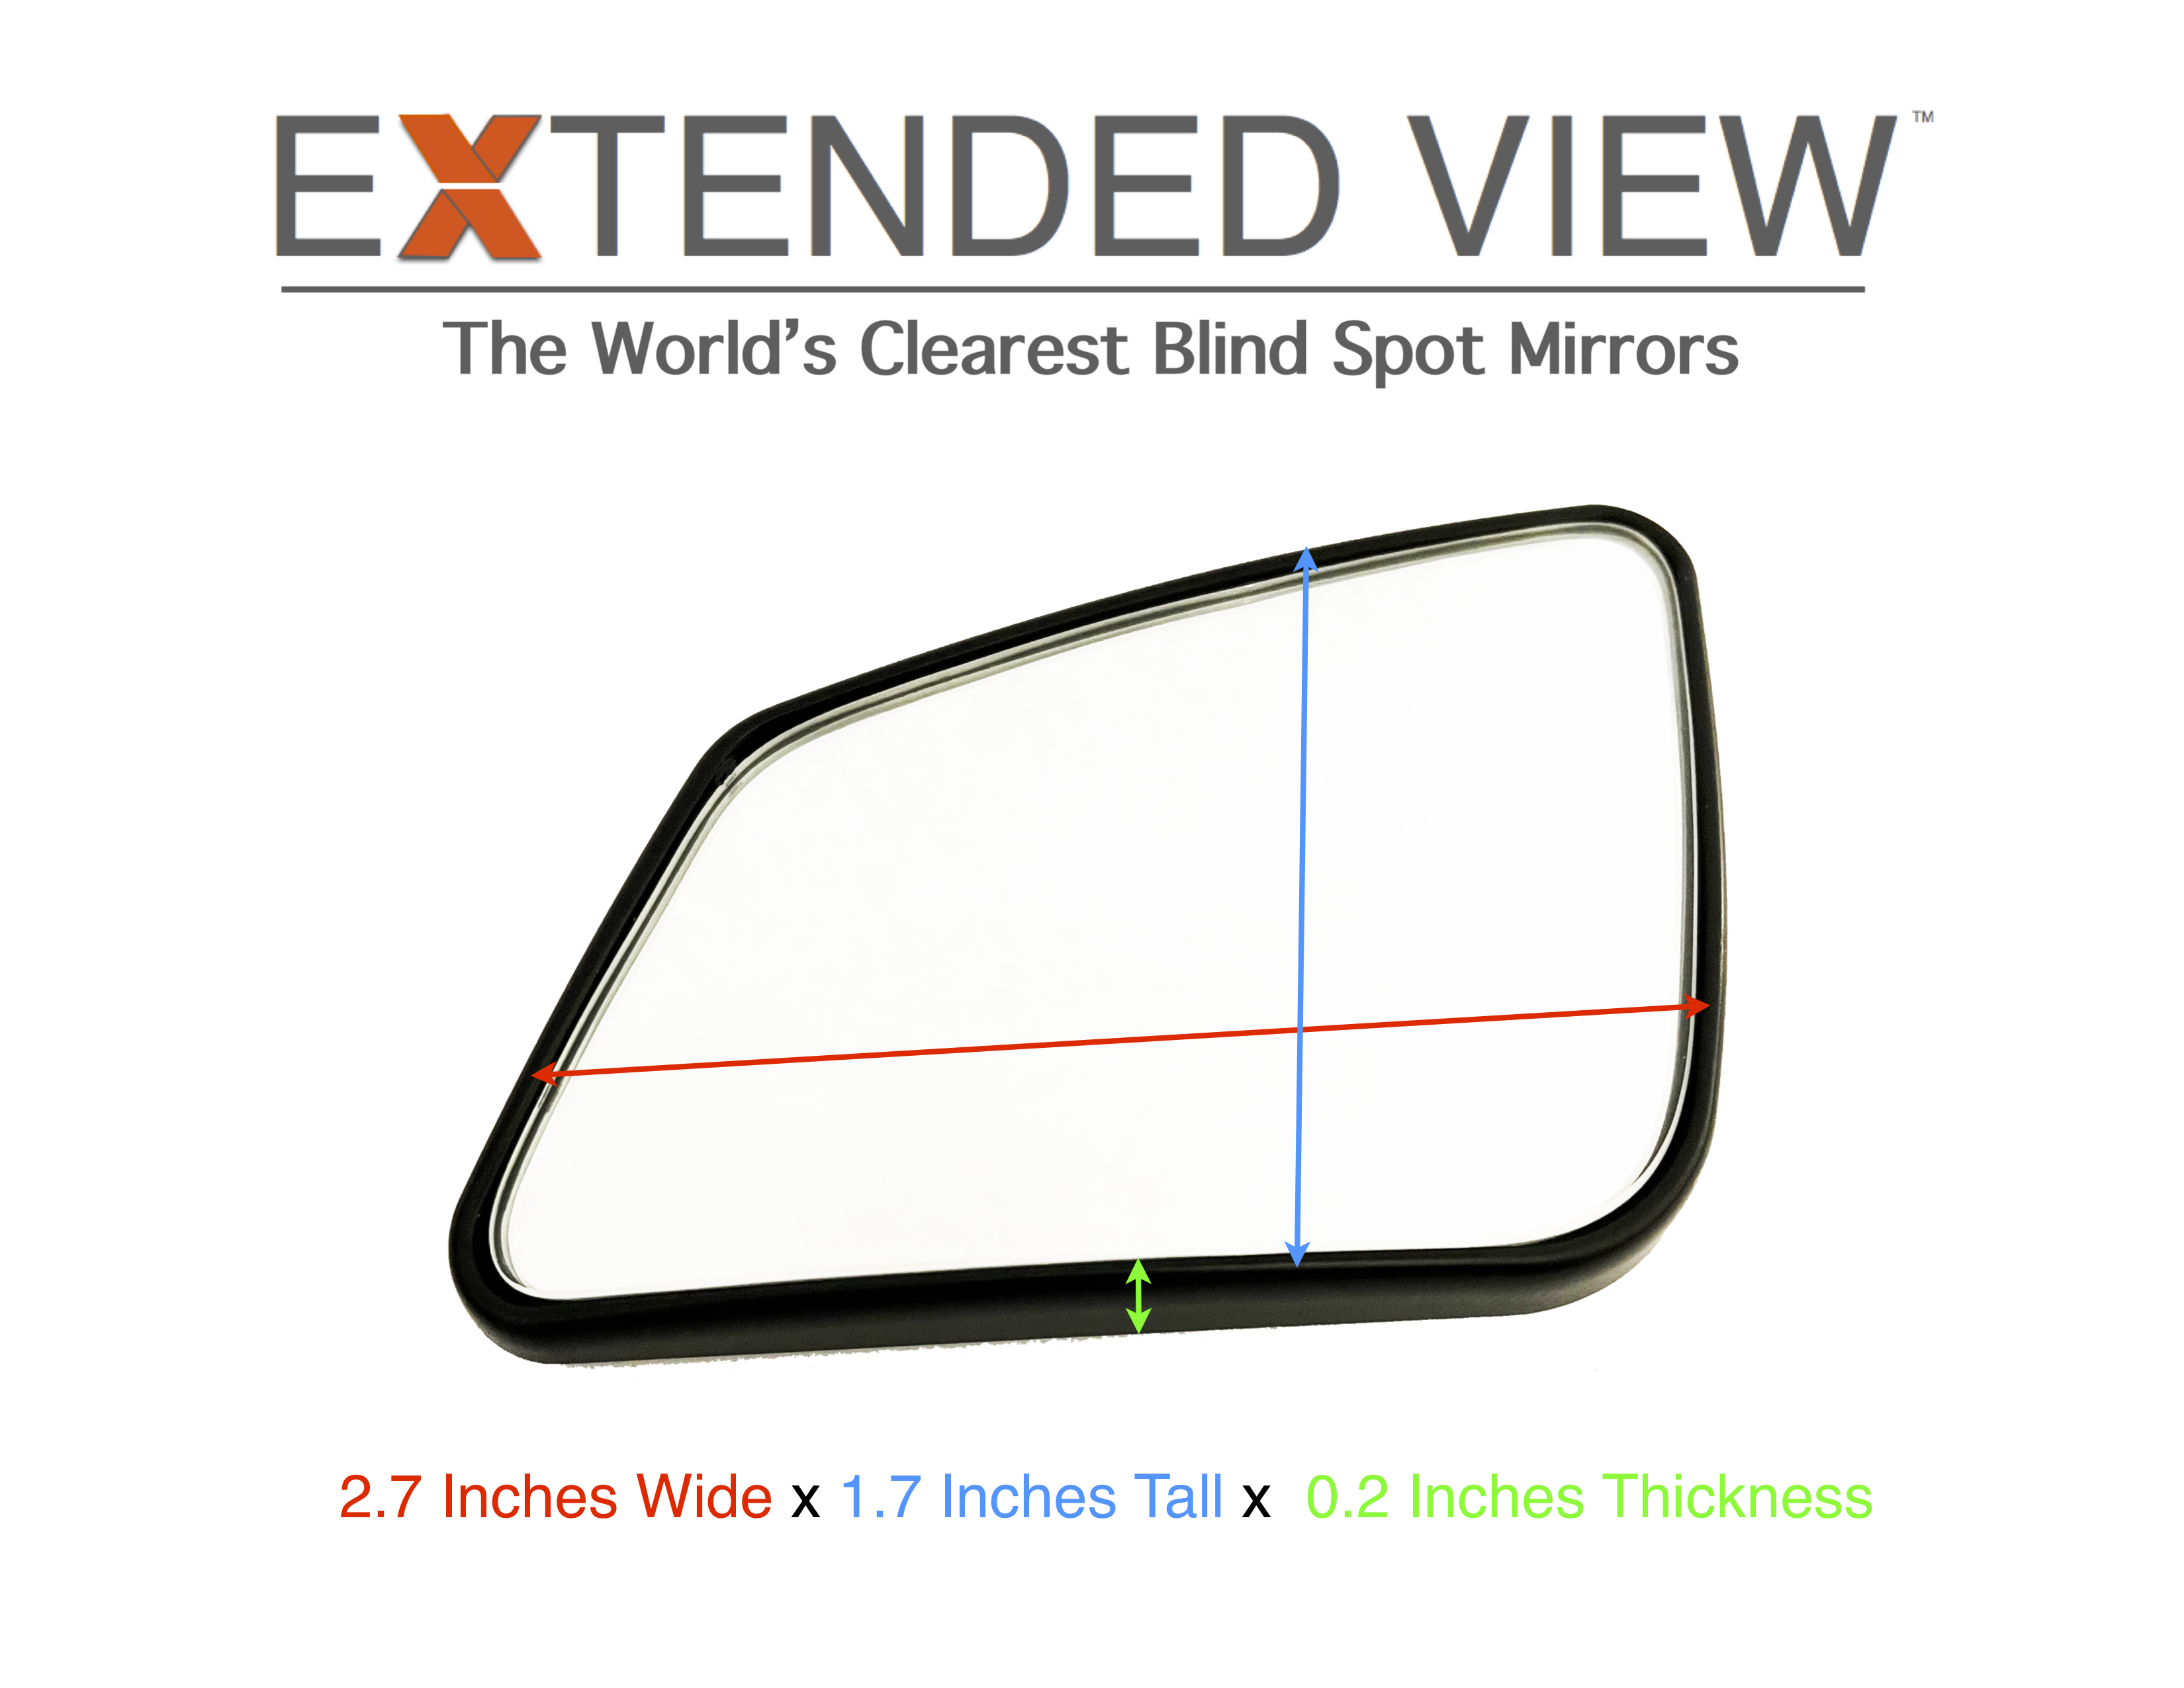 BMW 6 Series Blind Spot Mirrors | F12 Extended View™